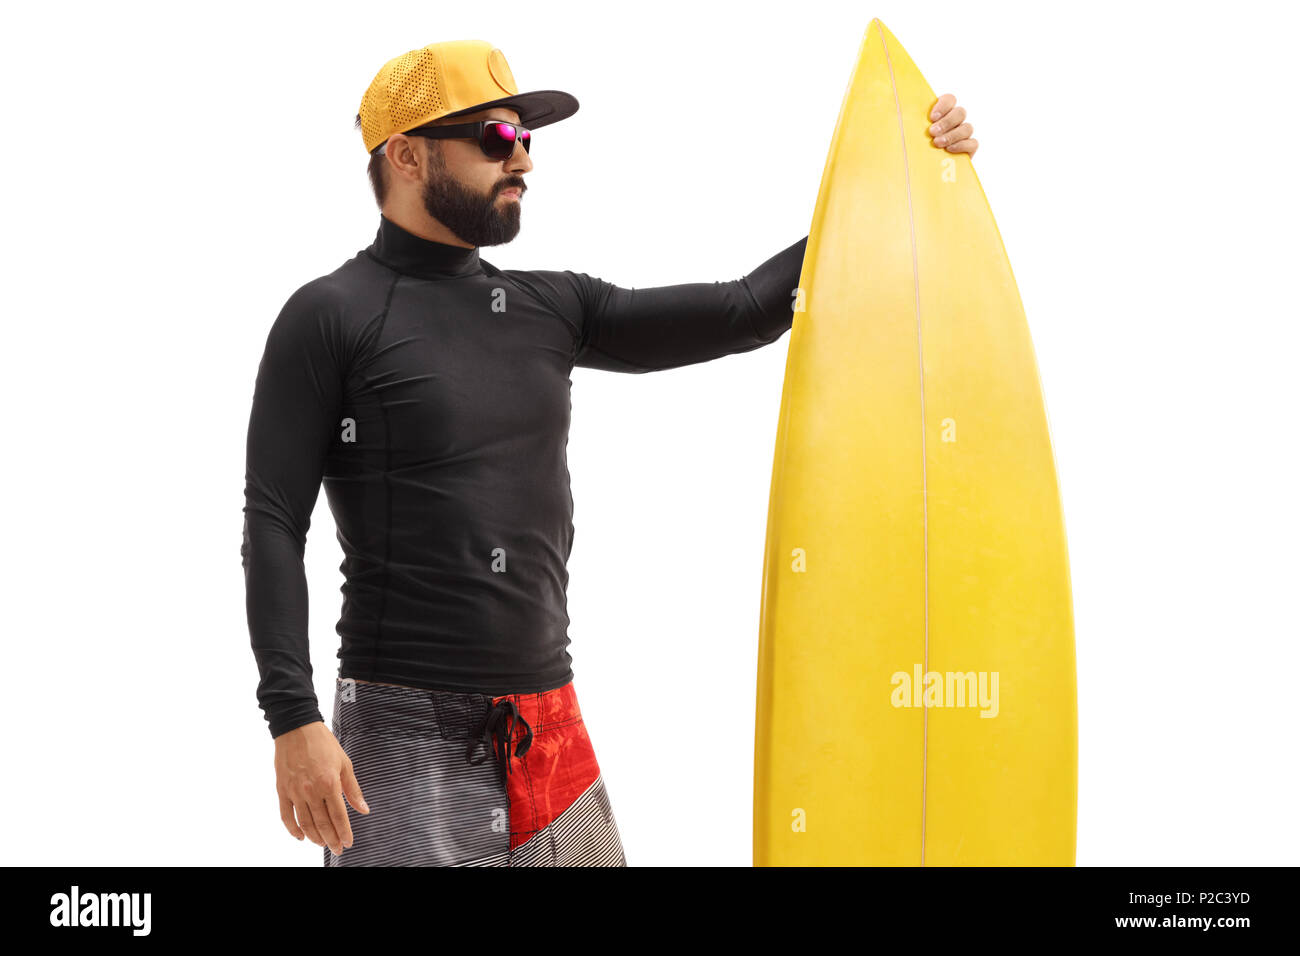 Surfer holding a surfboard isolated on white background Stock Photo